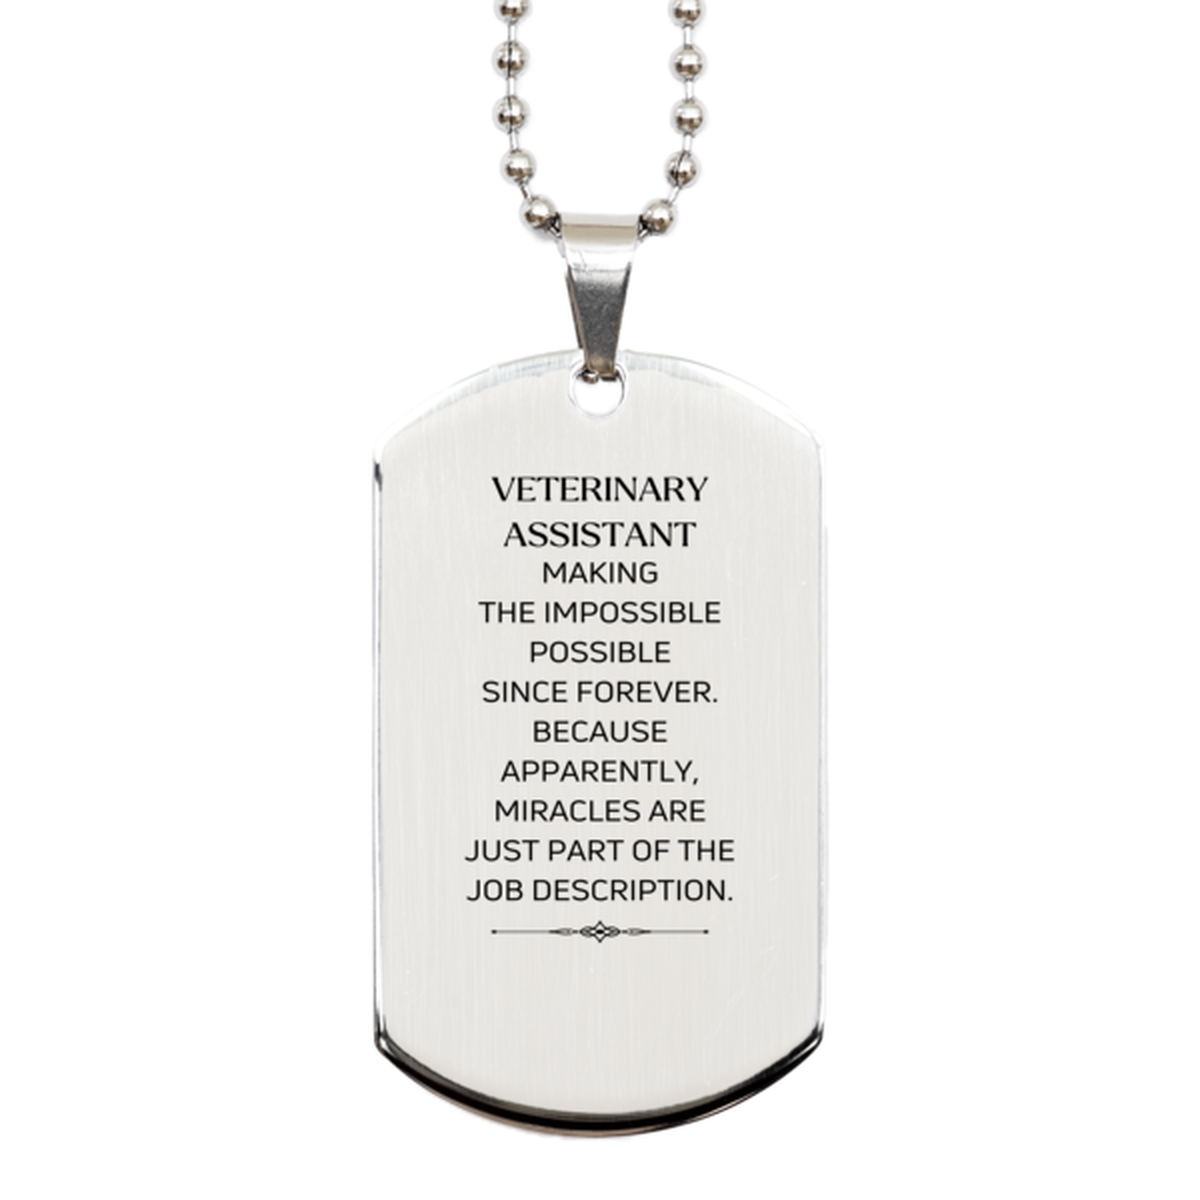 Funny Veterinary Assistant Gifts, Miracles are just part of the job description, Inspirational Birthday Silver Dog Tag For Veterinary Assistant, Men, Women, Coworkers, Friends, Boss